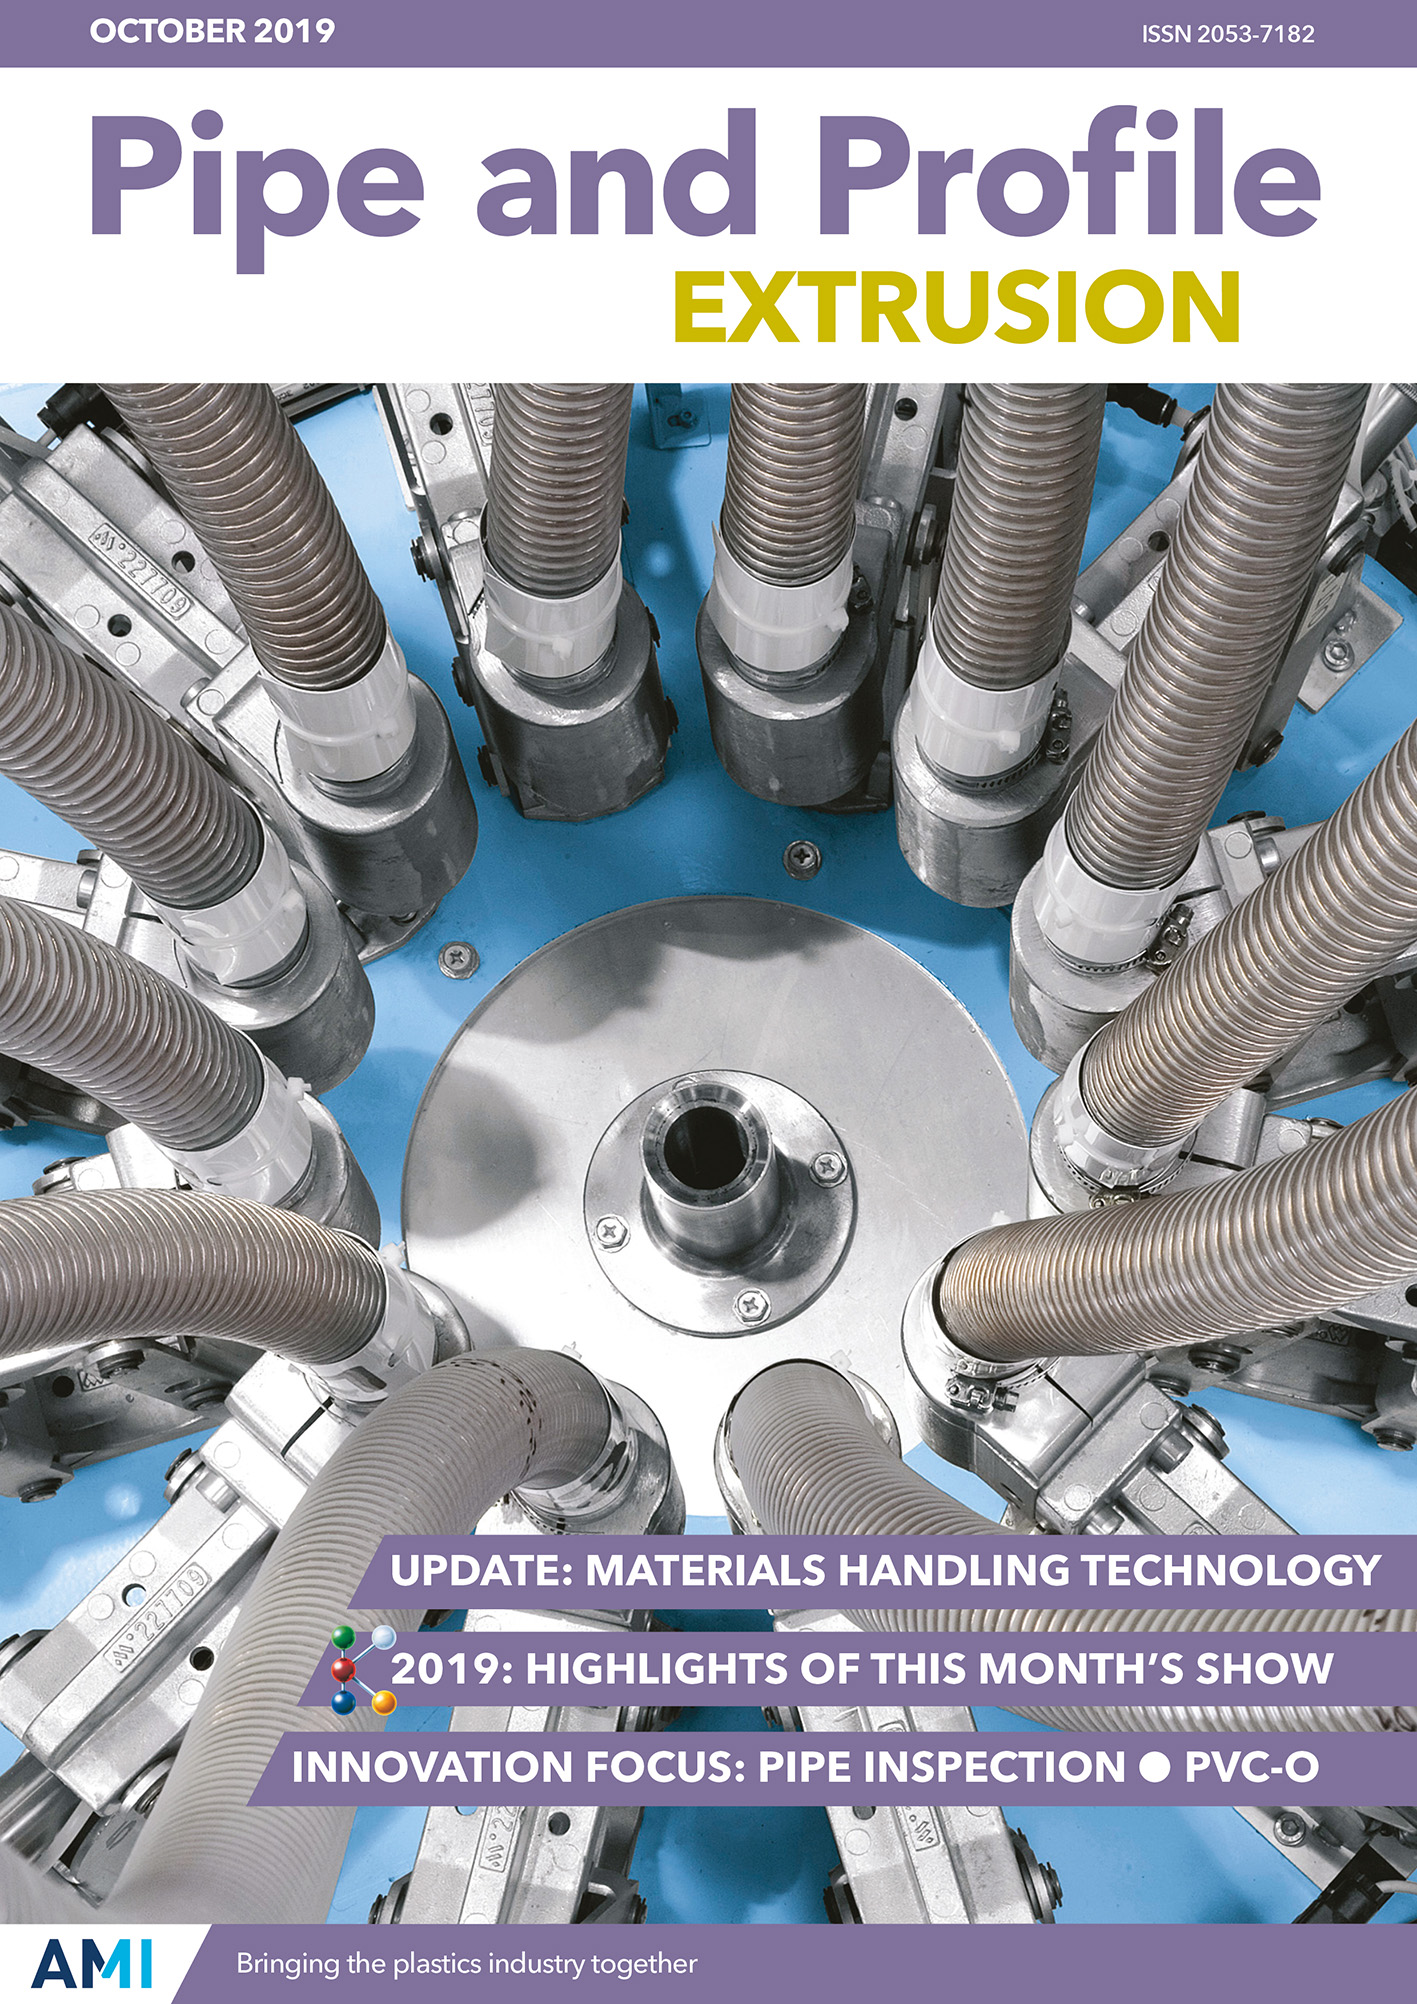 Pipe and Profile Extrusion October 2019